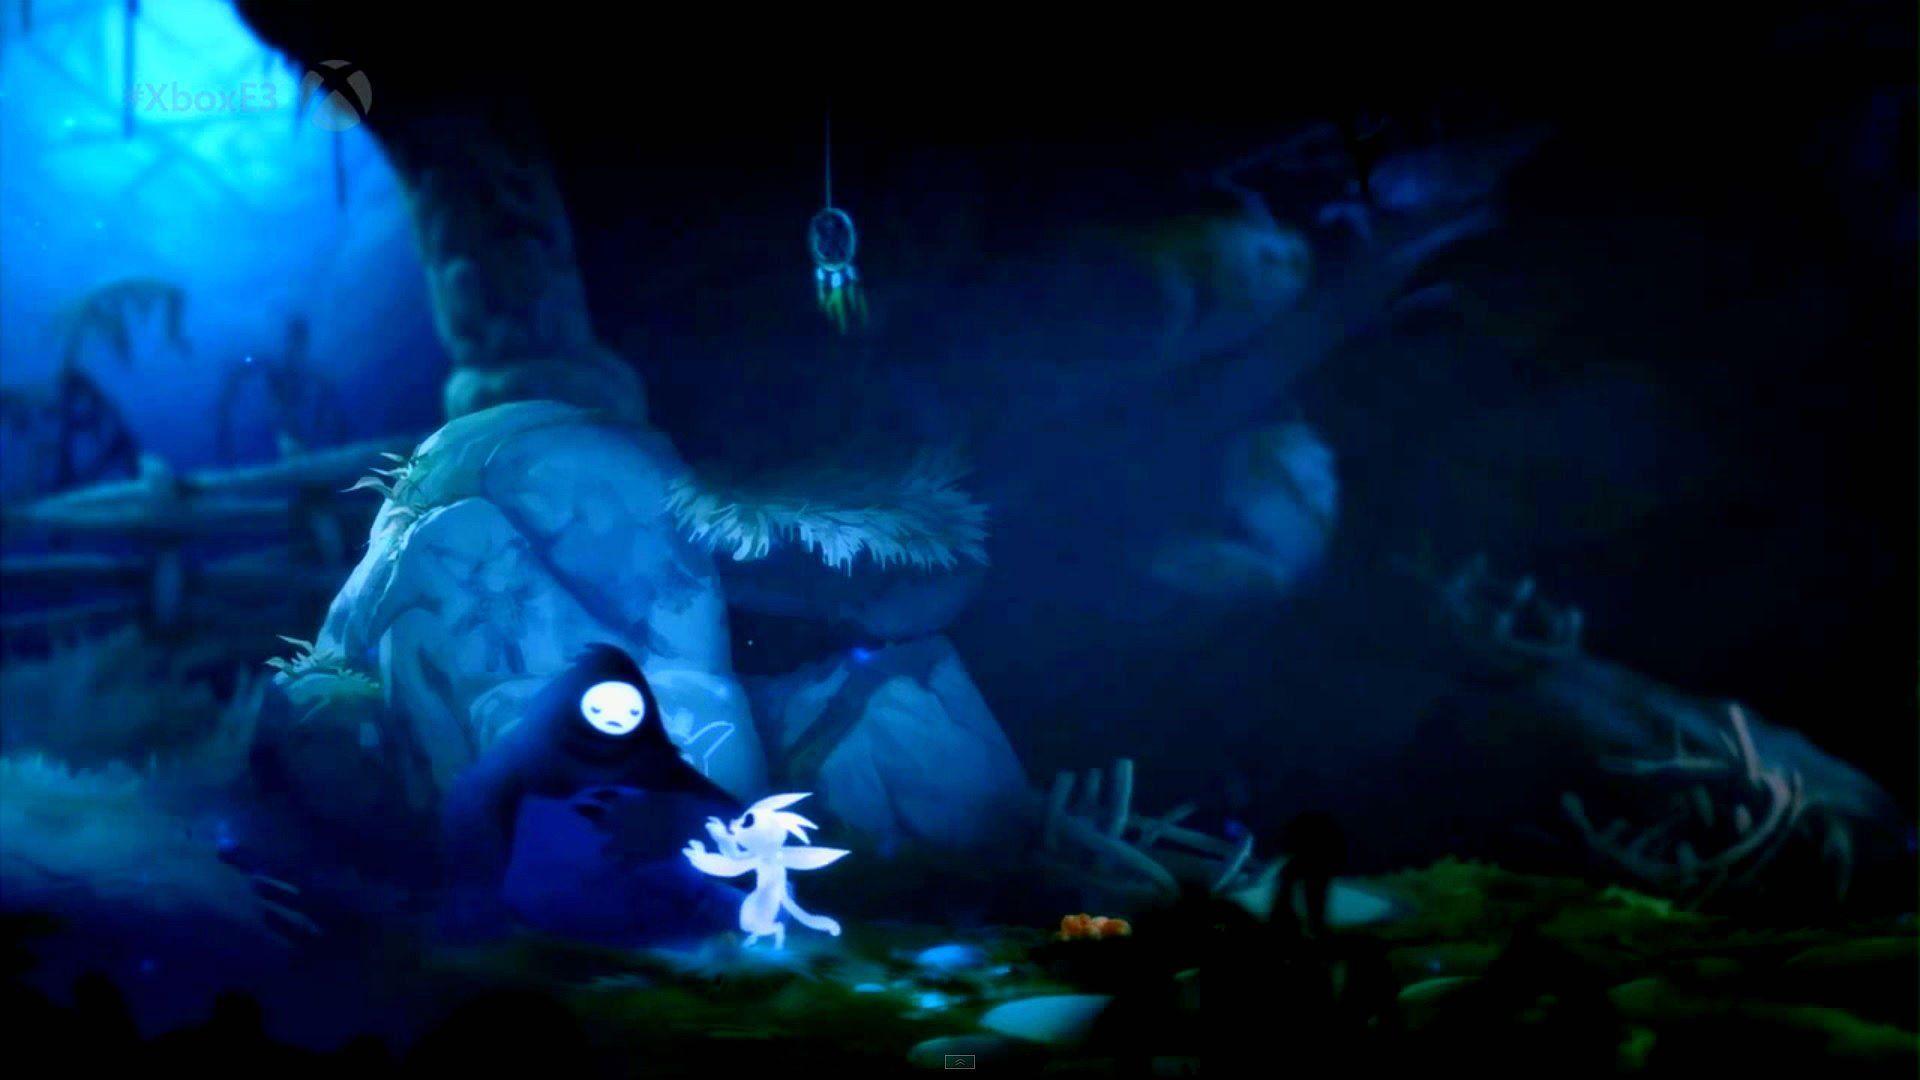 Ori And The Blind Forest Wallpaper, Cool Ori And The Blind Forest